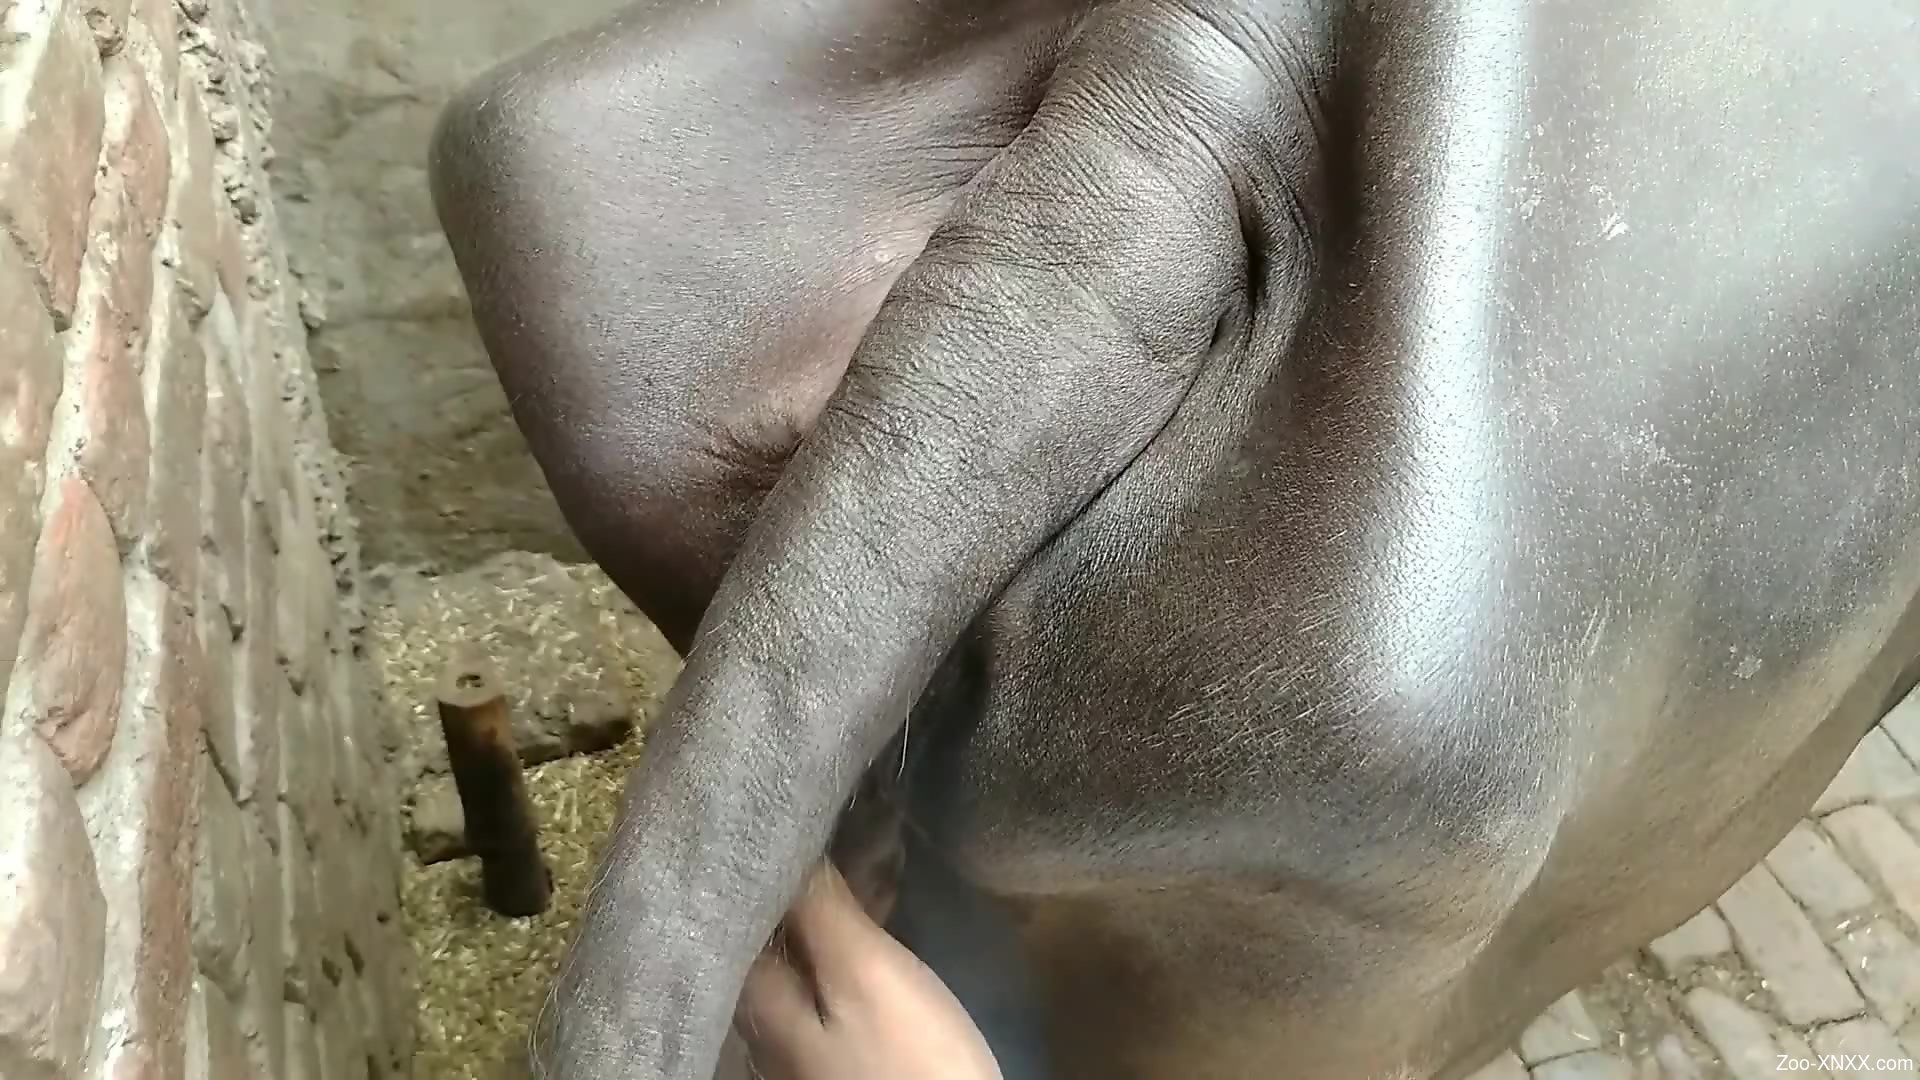 Black Cow Pussy - Man wants to fuck this cow's pussy in such a hard mode